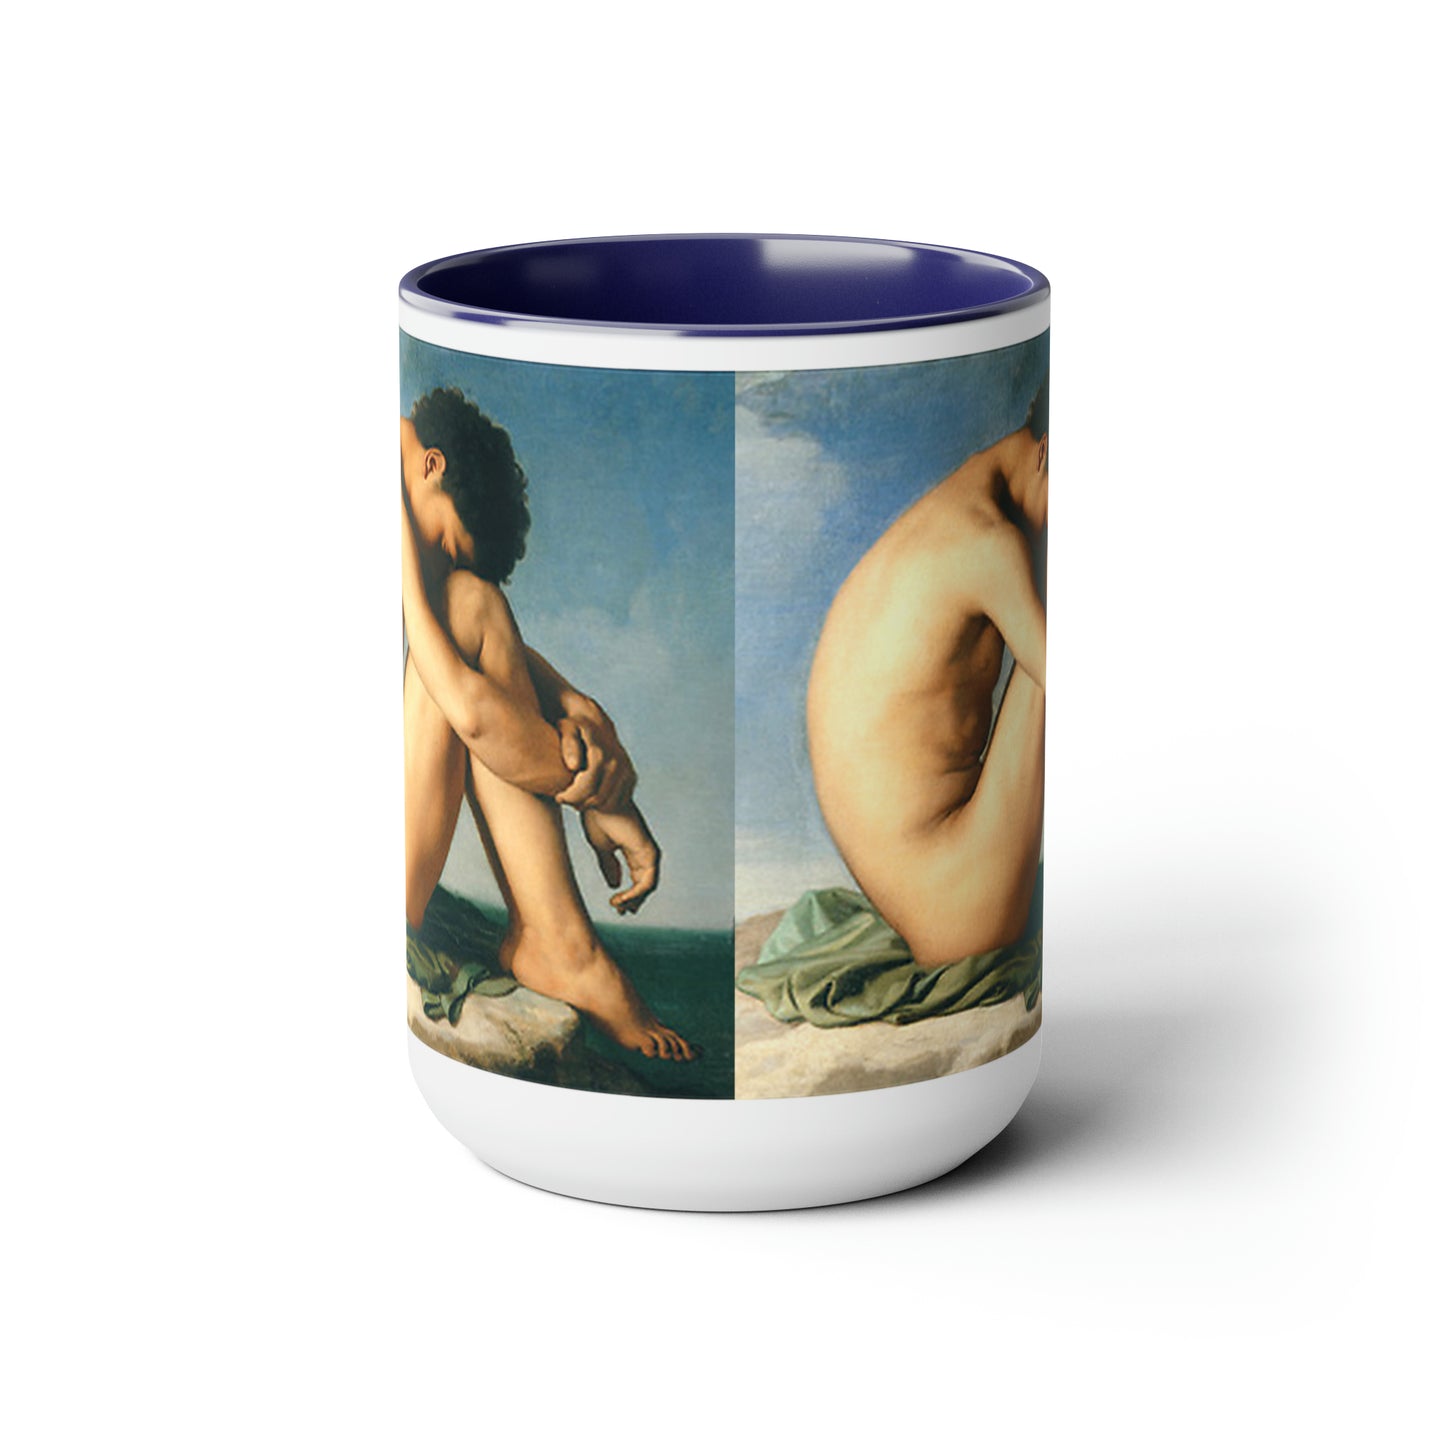 Young Man by the Sea Two-Tone Coffee Mugs, 15oz